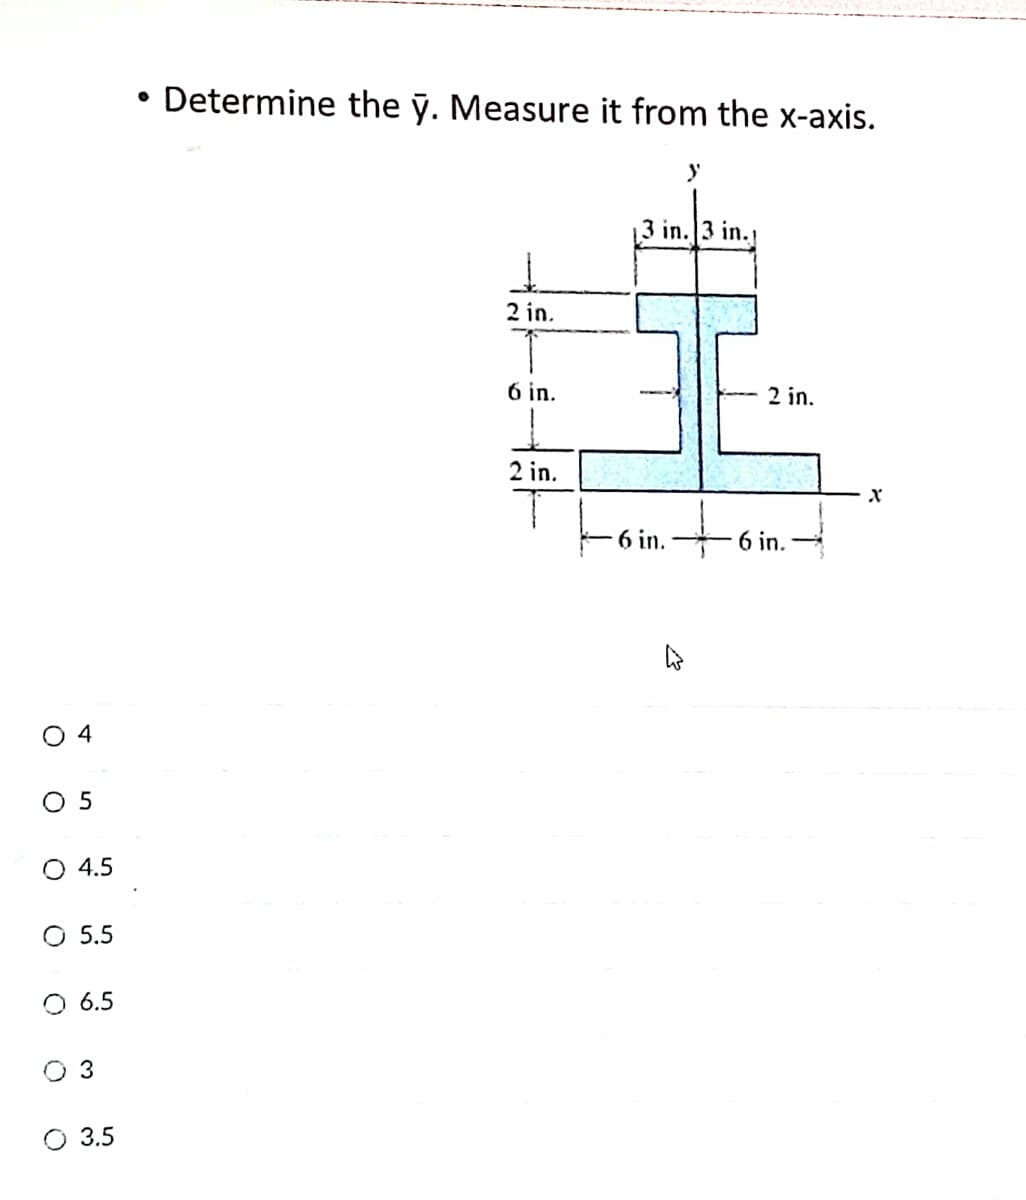 • Determine the ỹ. Measure it from the x-axis.
3 in. 3 in.,
2 in.
6 in.
2 in.
2 in.
to
6 in.
6 in.
O 4
O 5
O 4.5
O 5.5
O 6.5
O 3
O 3.5
